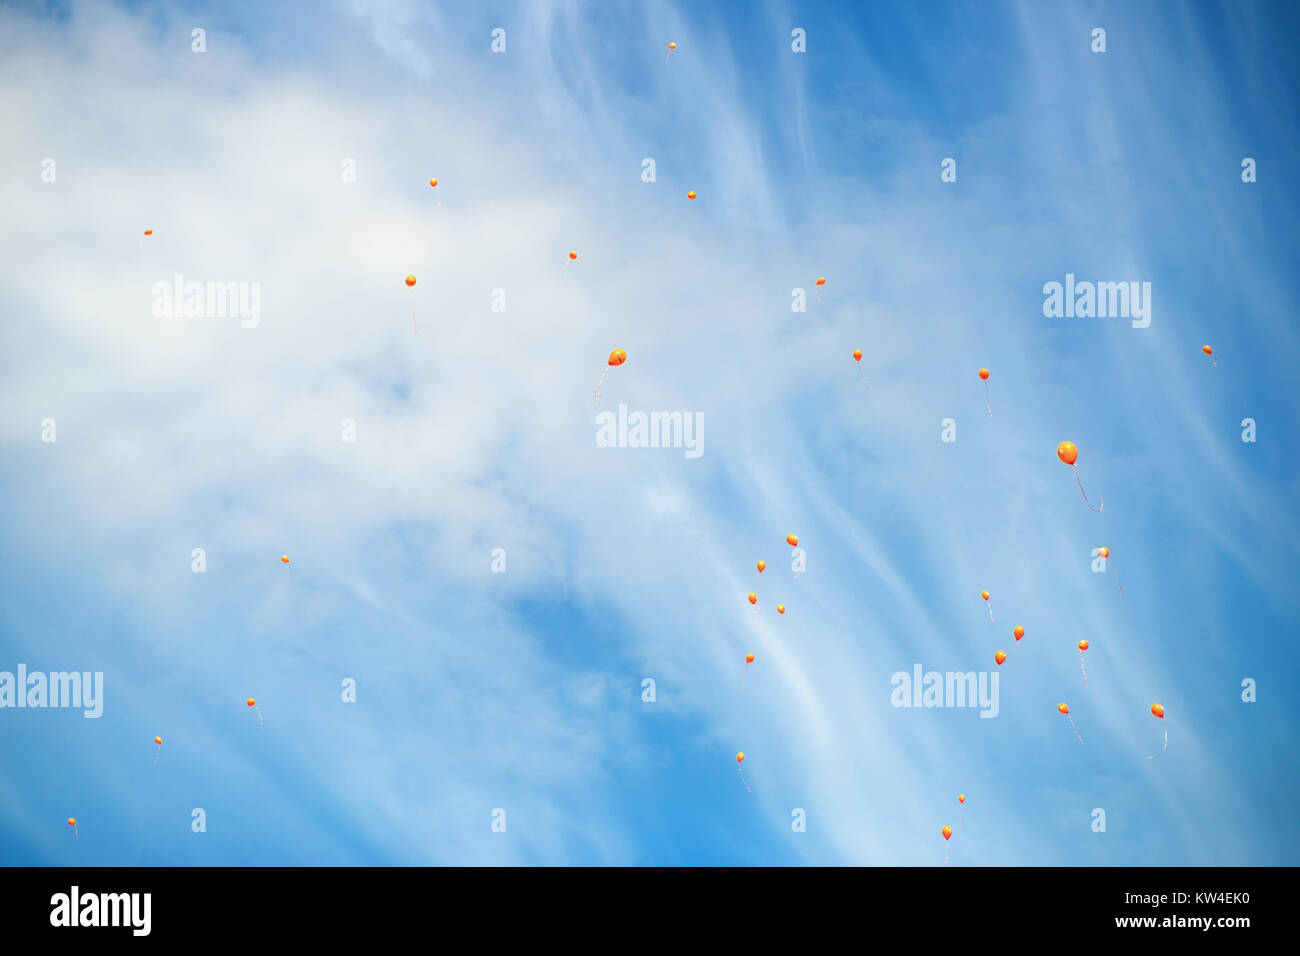 Orange ballons on a blue sky with white clouds Stock Photo